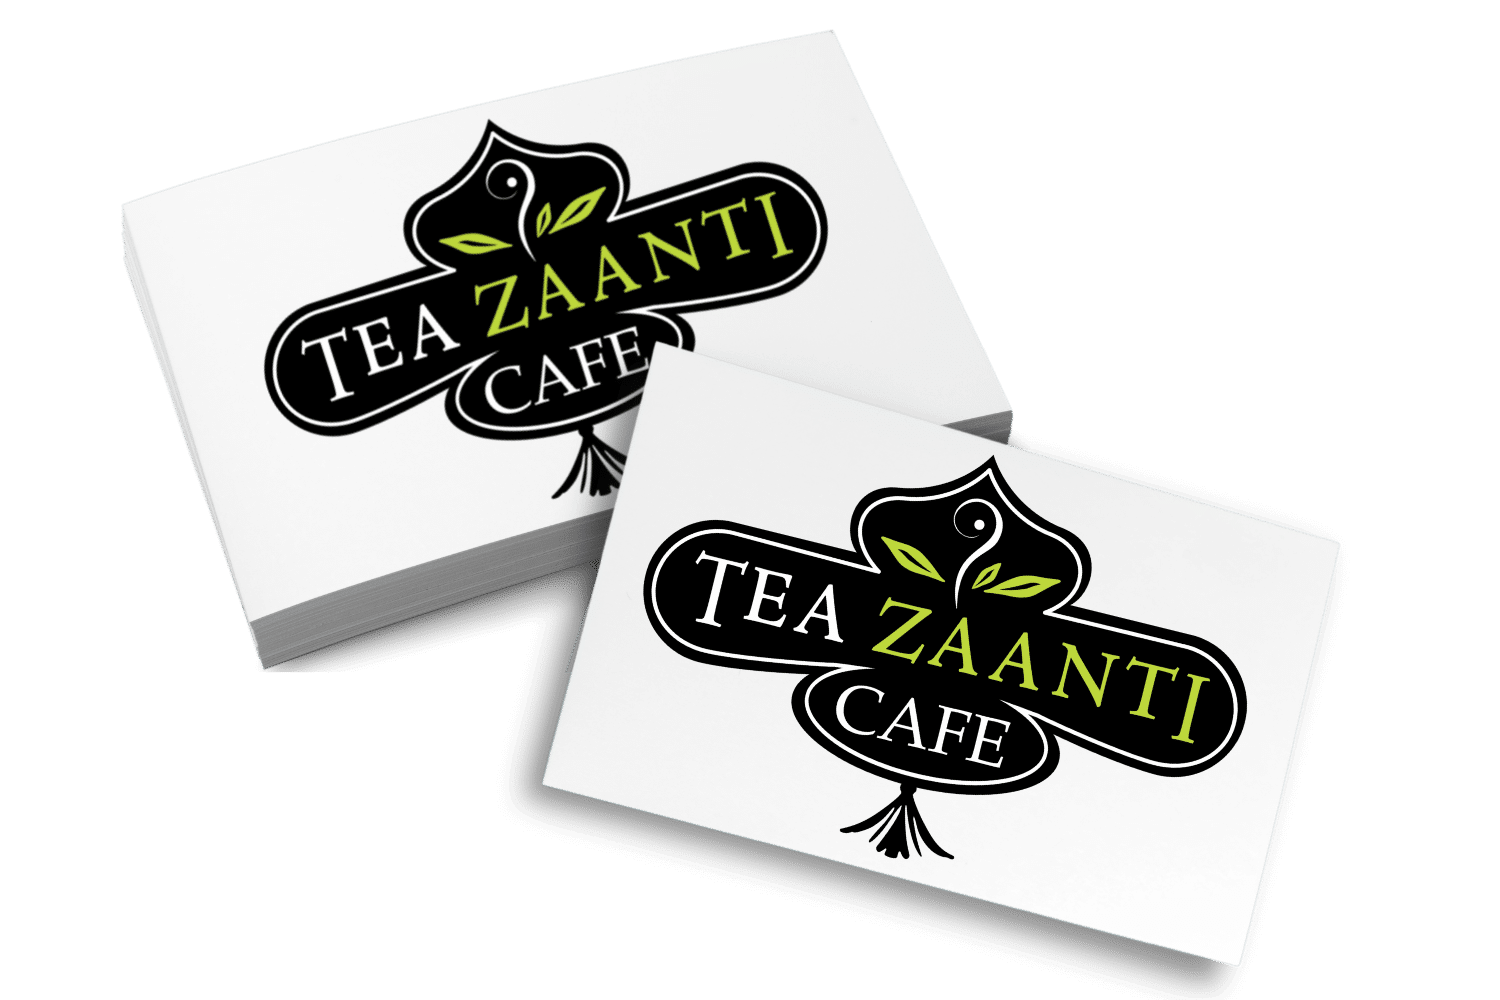 Tea cafe company logo business card mockup graphic design at Big Red Jelly.